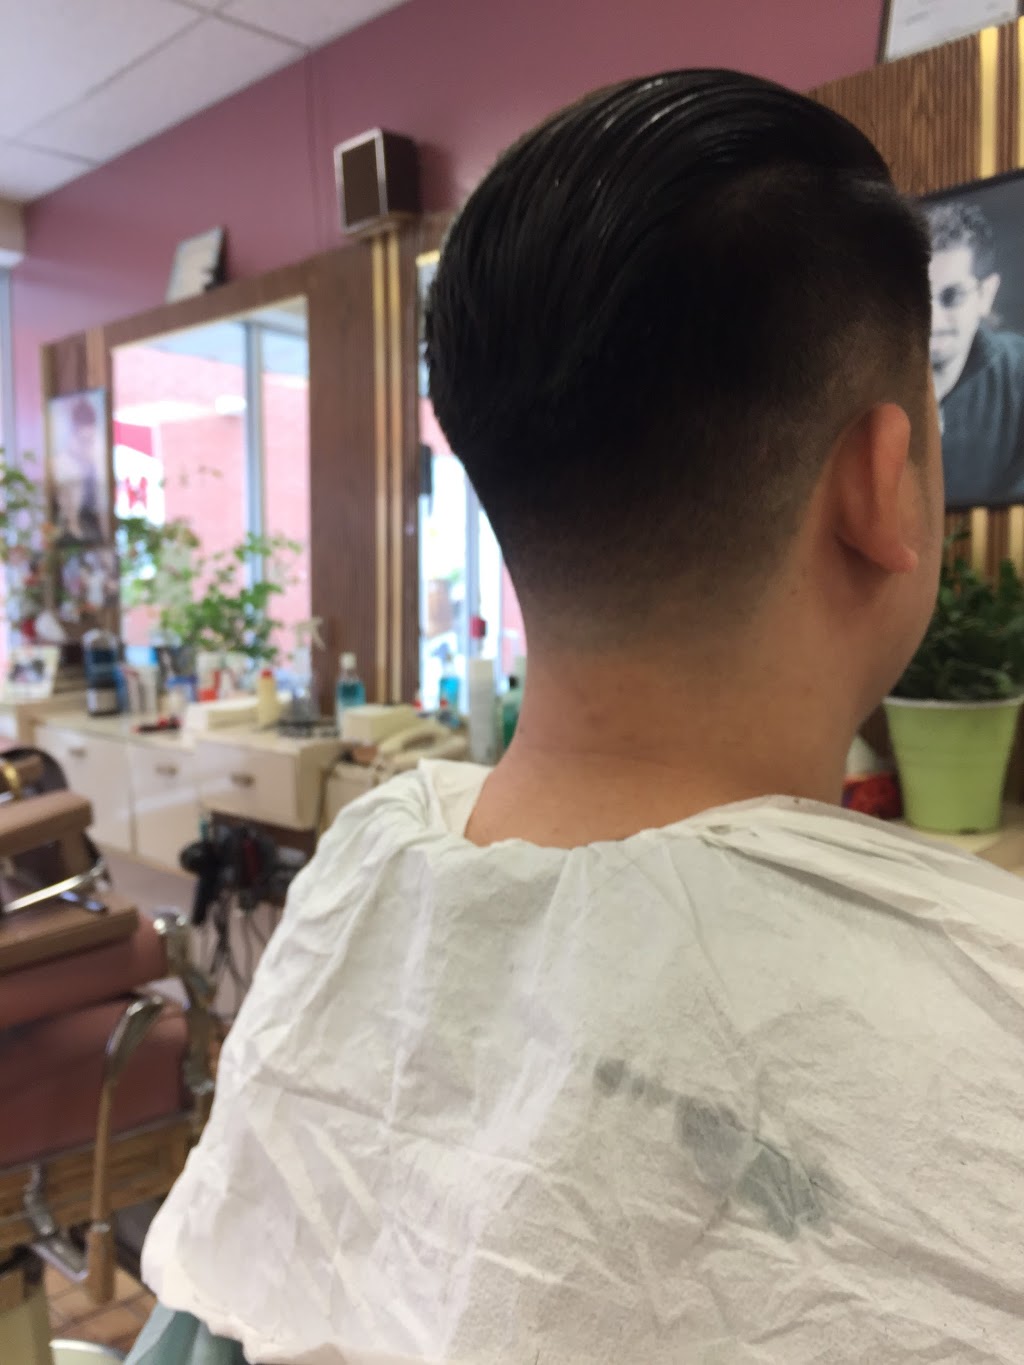 Parkwoods Unisex Hairstyling | Behind Shoppers Drug Mart, 1277 York Mills Rd, North York, ON M3A 1Z5, Canada | Phone: (416) 447-3269